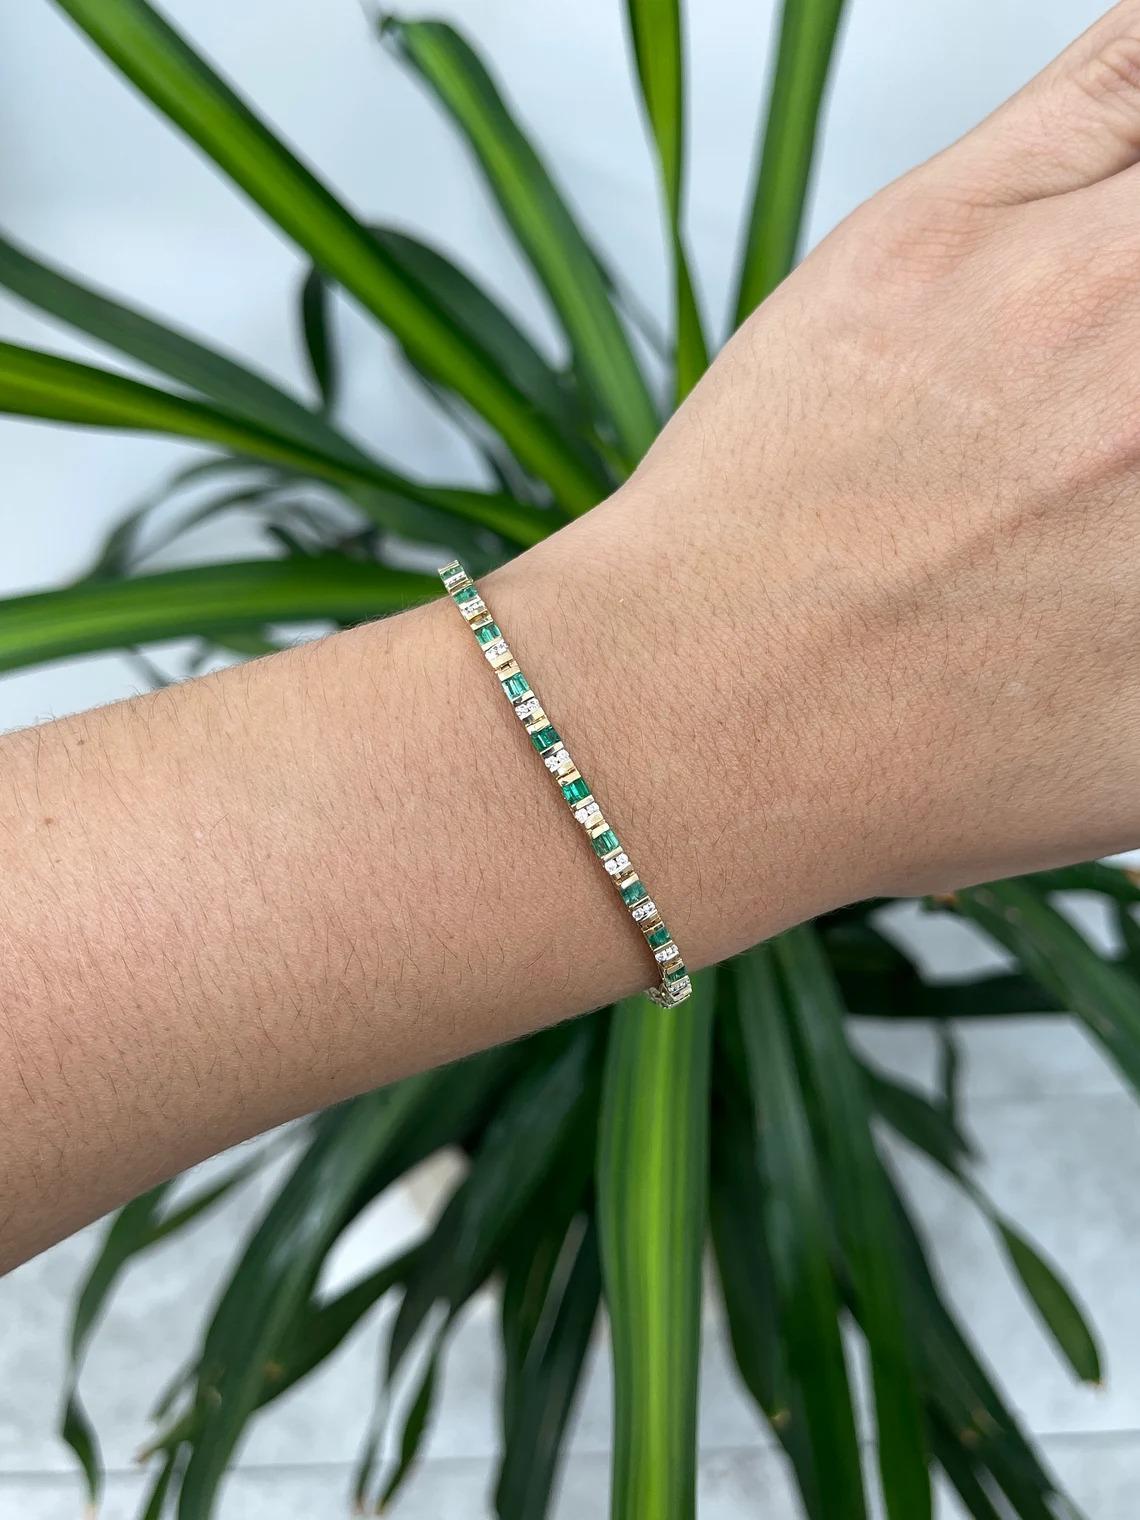 Featured is a beautiful emerald and diamond unisex bracelet. This bracelet carries almost two full carats of emeralds-baguette cut with very good clarity and luster. Channel set with numerous brilliant round cur diamonds going along the entire